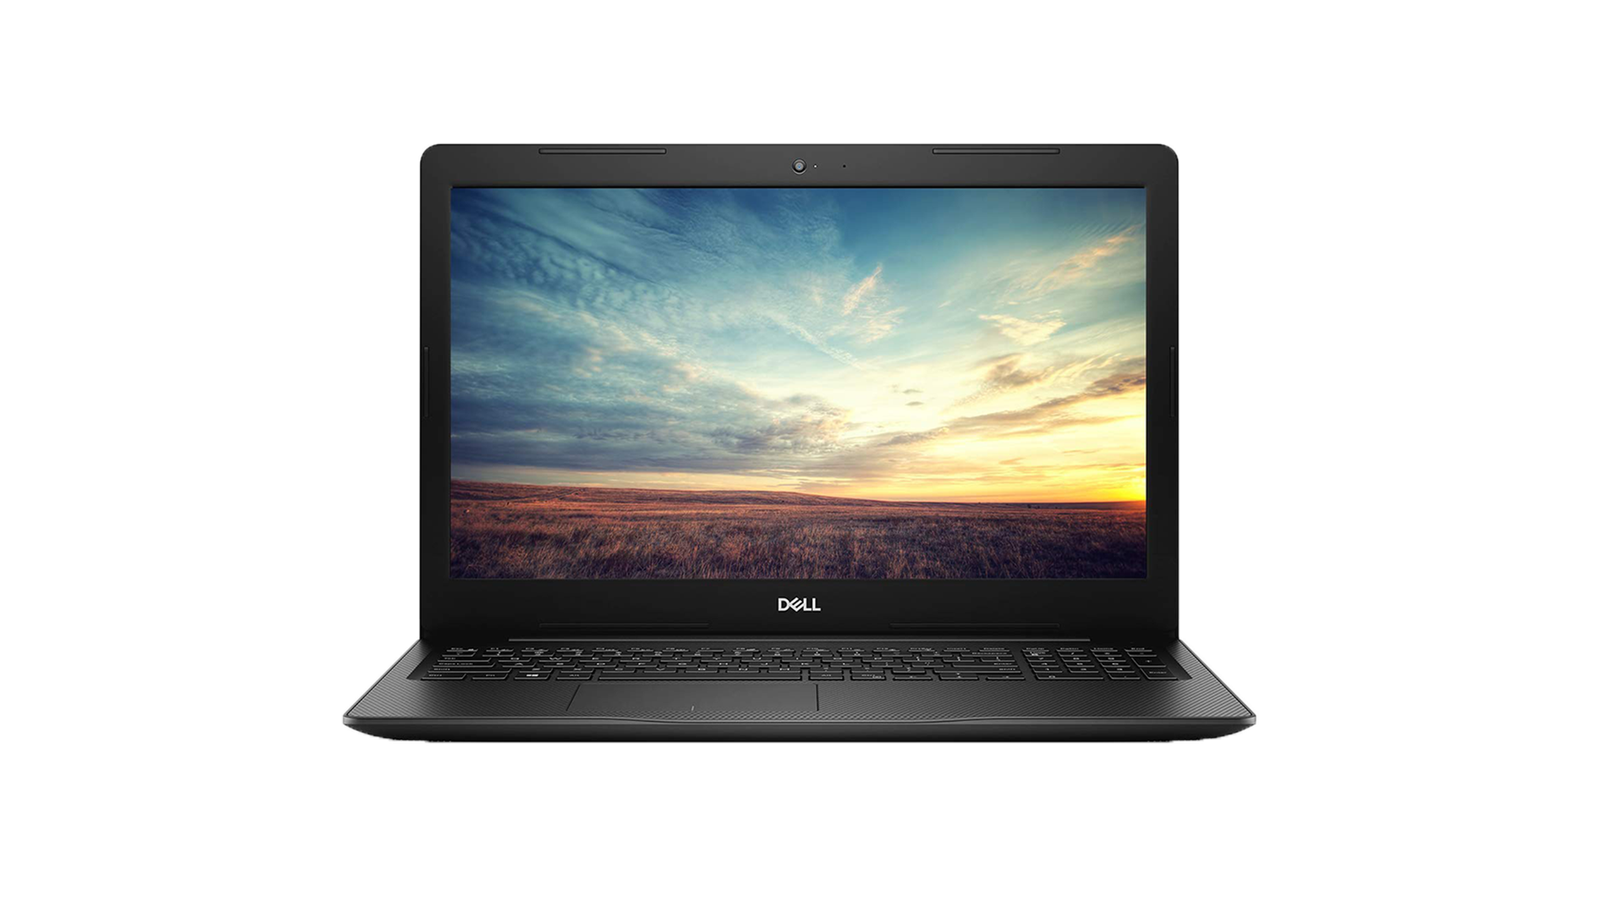 Dell Inspiron 15 3000 - The best Dell laptop for students